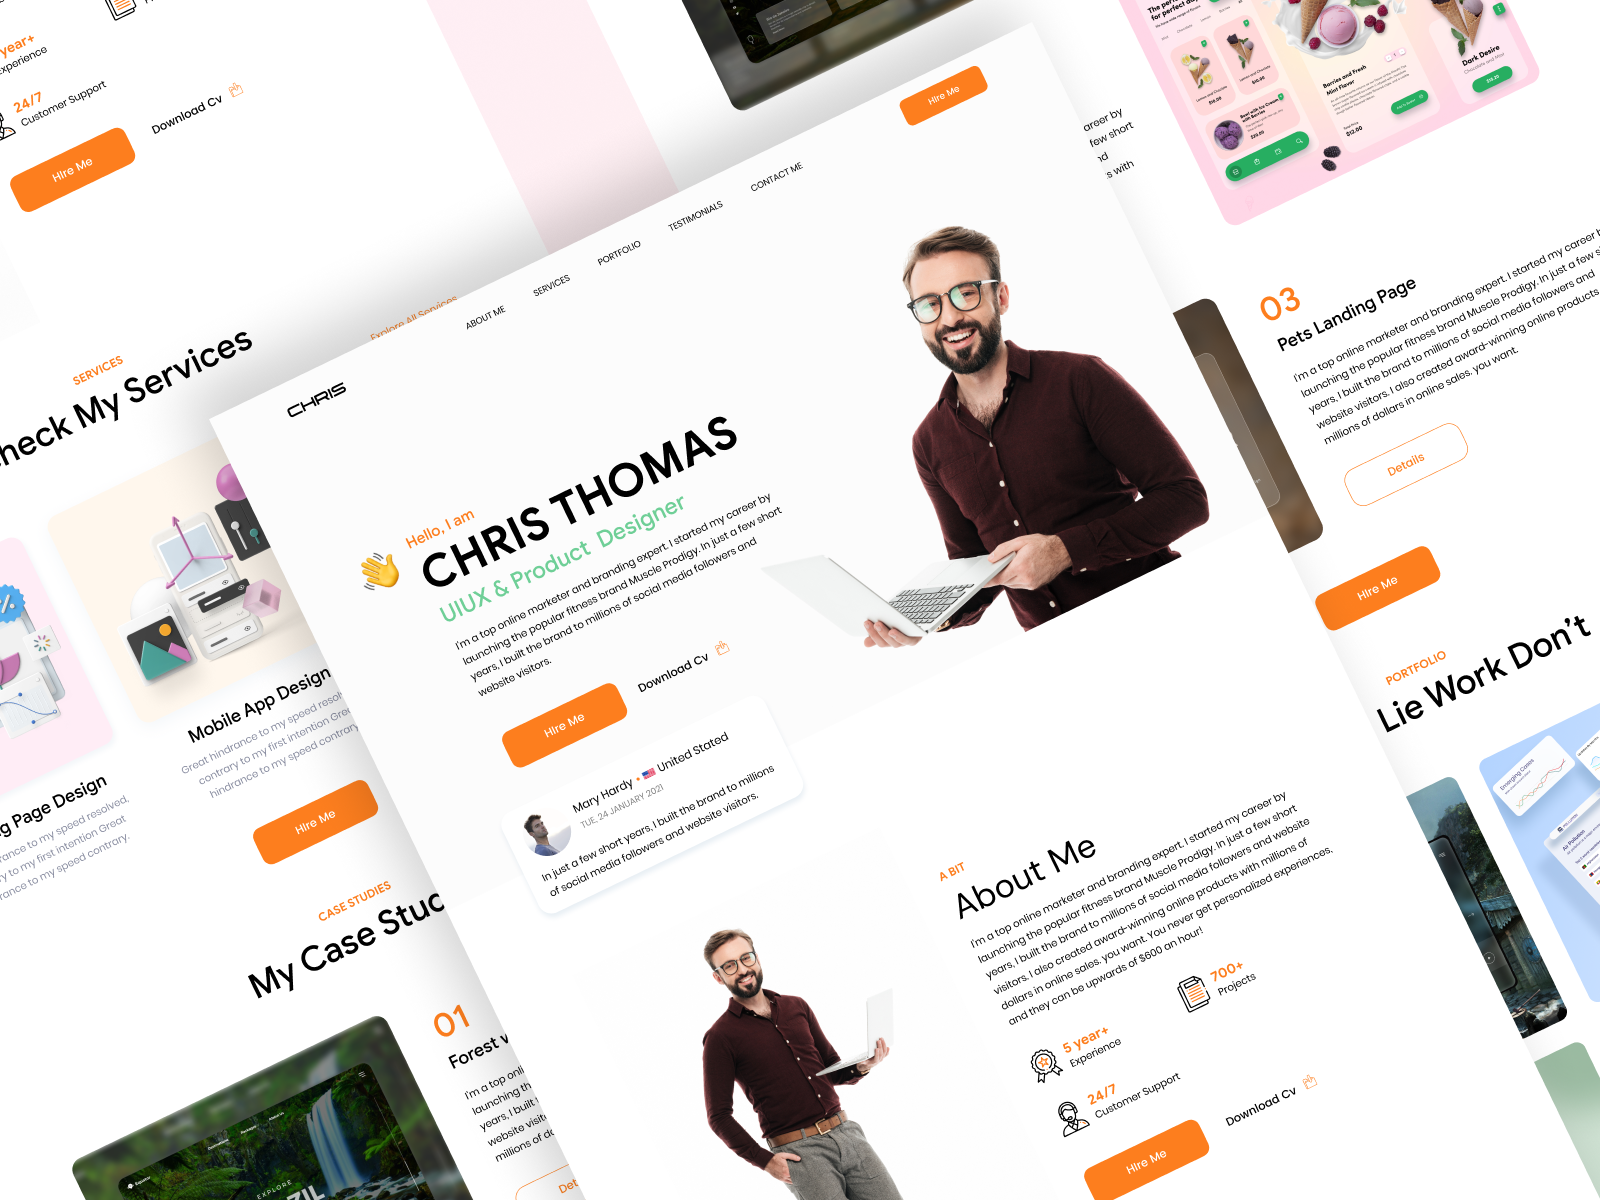 Freelancer landing page by Mike Taylor on Dribbble